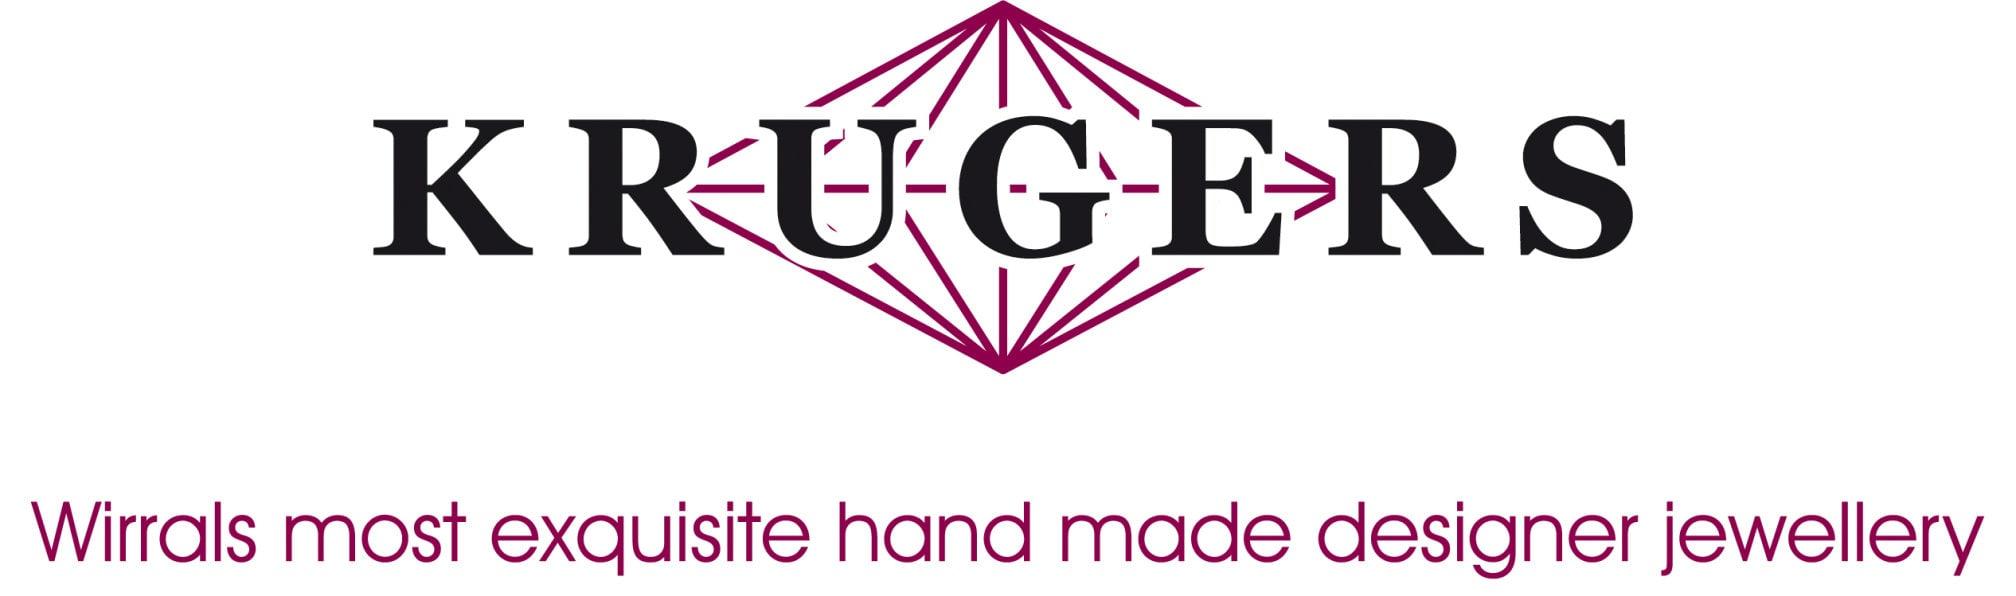 Kruger Jewellers Wallasey 01516 394431